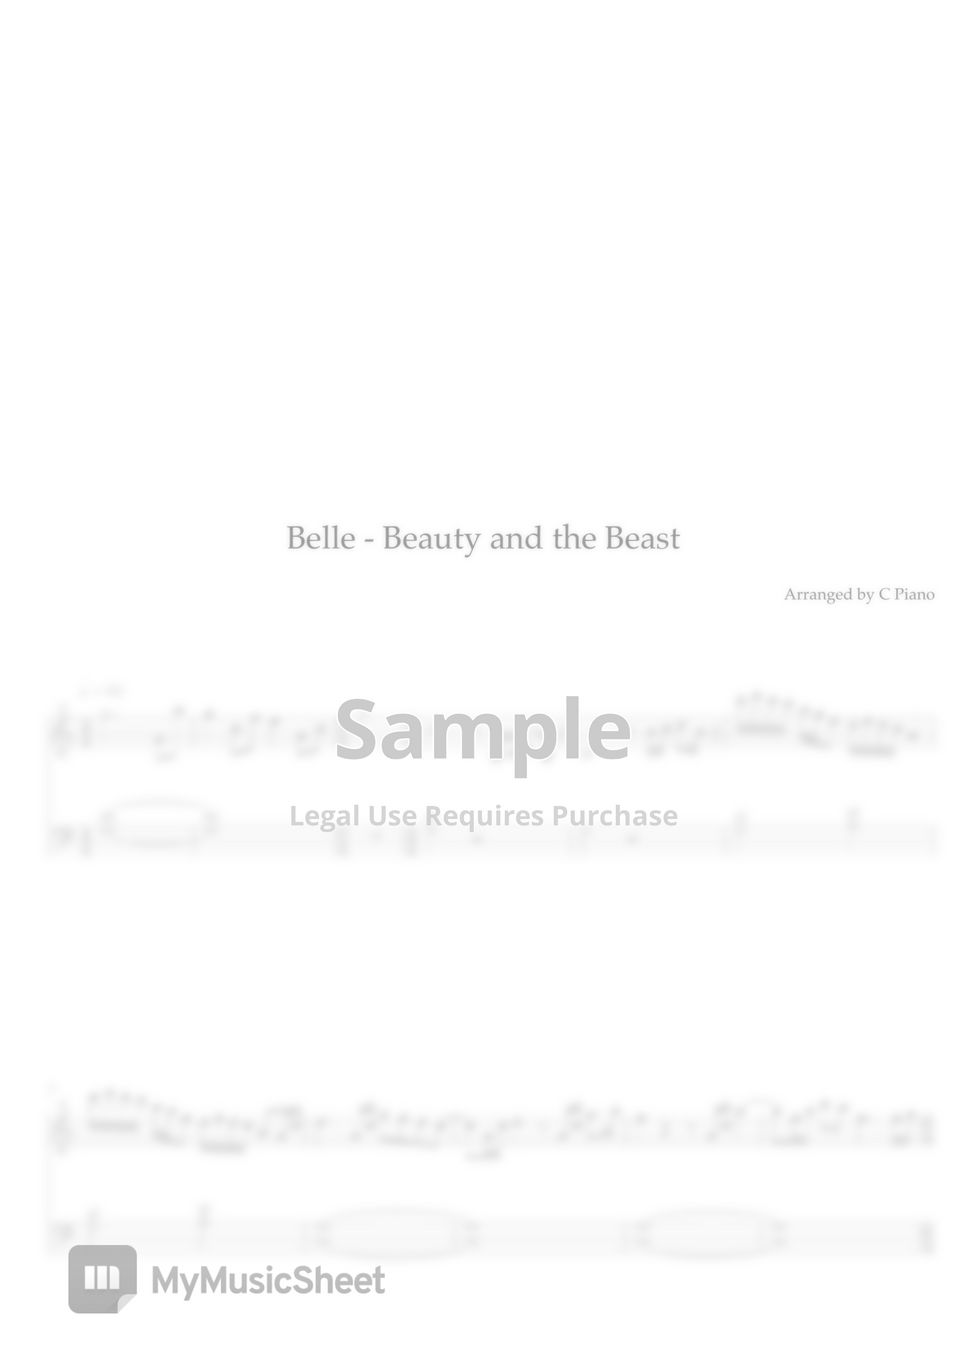 beauty-and-the-beast-belle-easy-version-sheets-by-c-piano